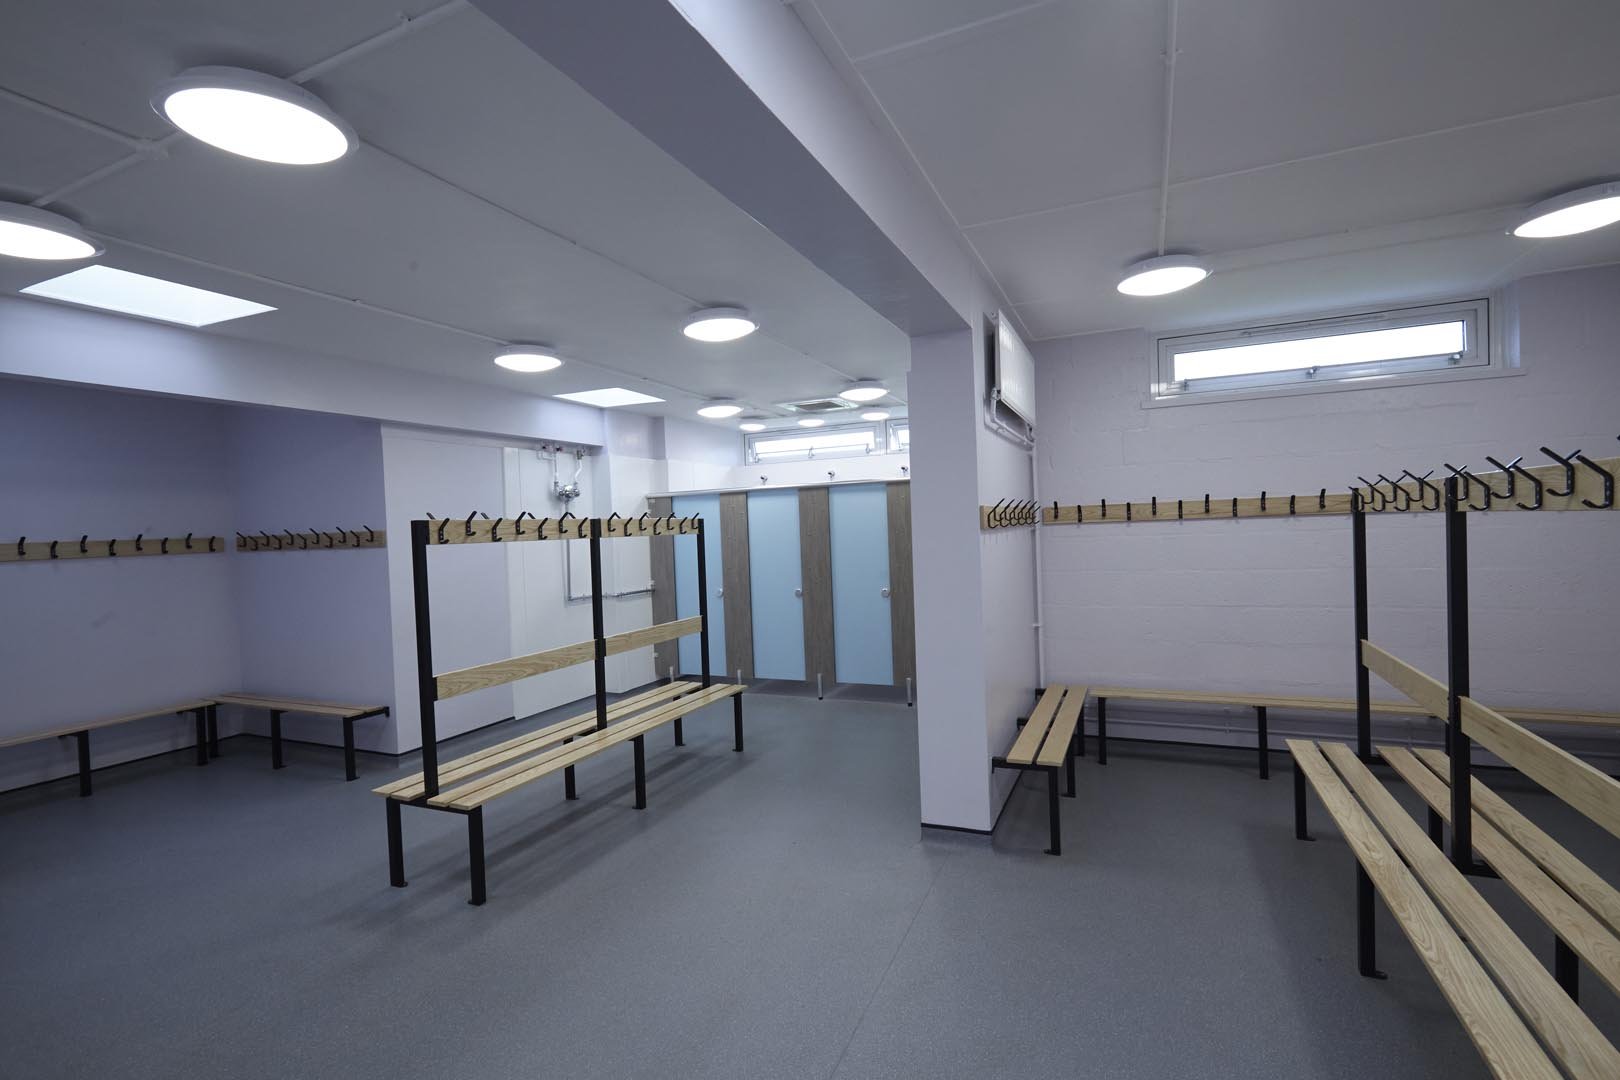 churchmead school changing room with storage benches.jpg